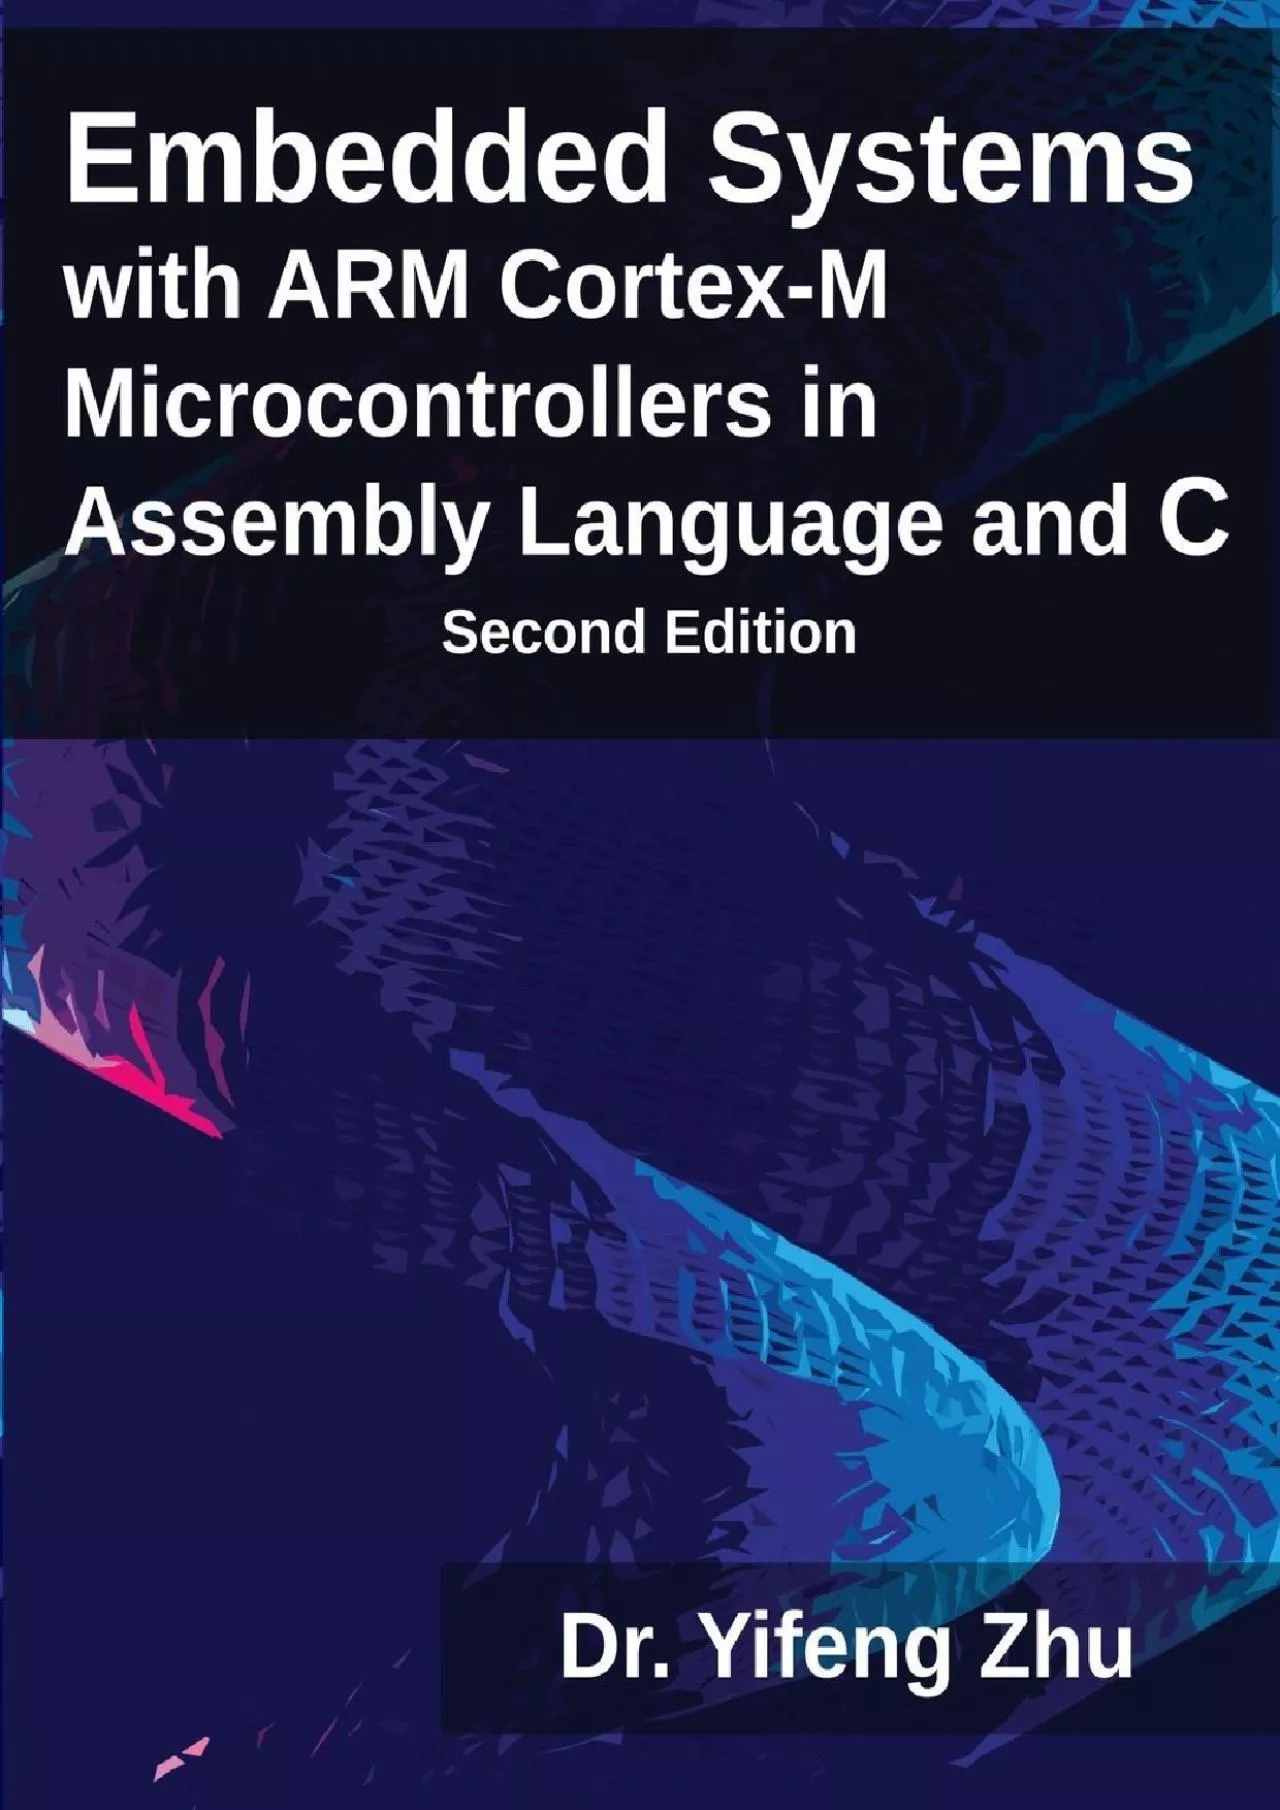 [READING BOOK]-Embedded Systems with ARM Cortex-M Microcontrollers in Assembly Language